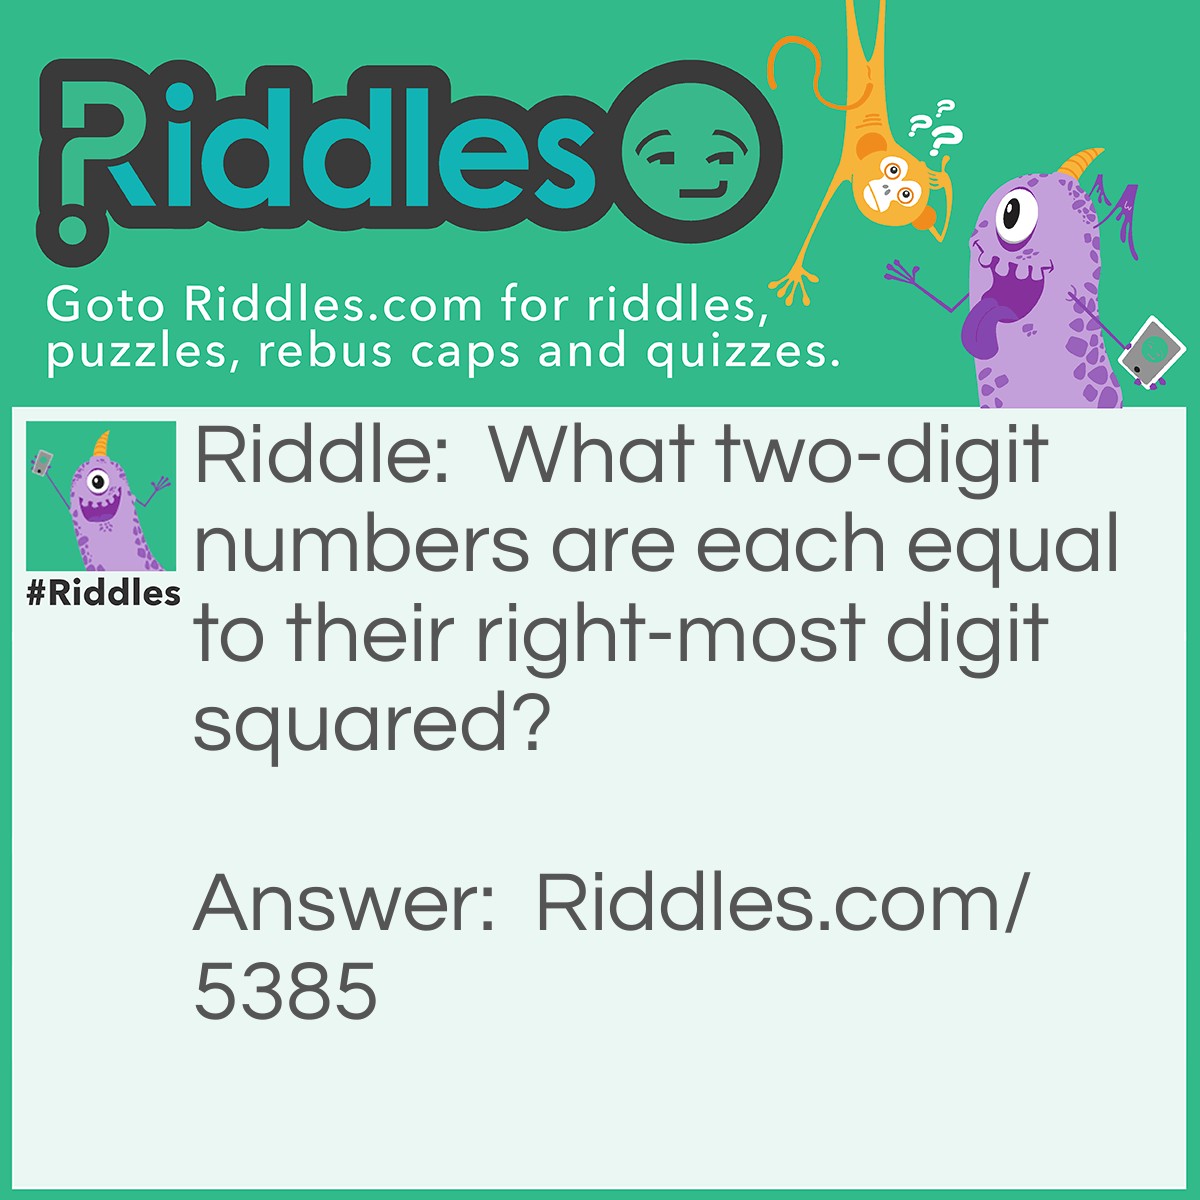 Riddle: What two-digit numbers are each equal to their right-most digit squared? Answer: 25 = 5² and 36 = 6².